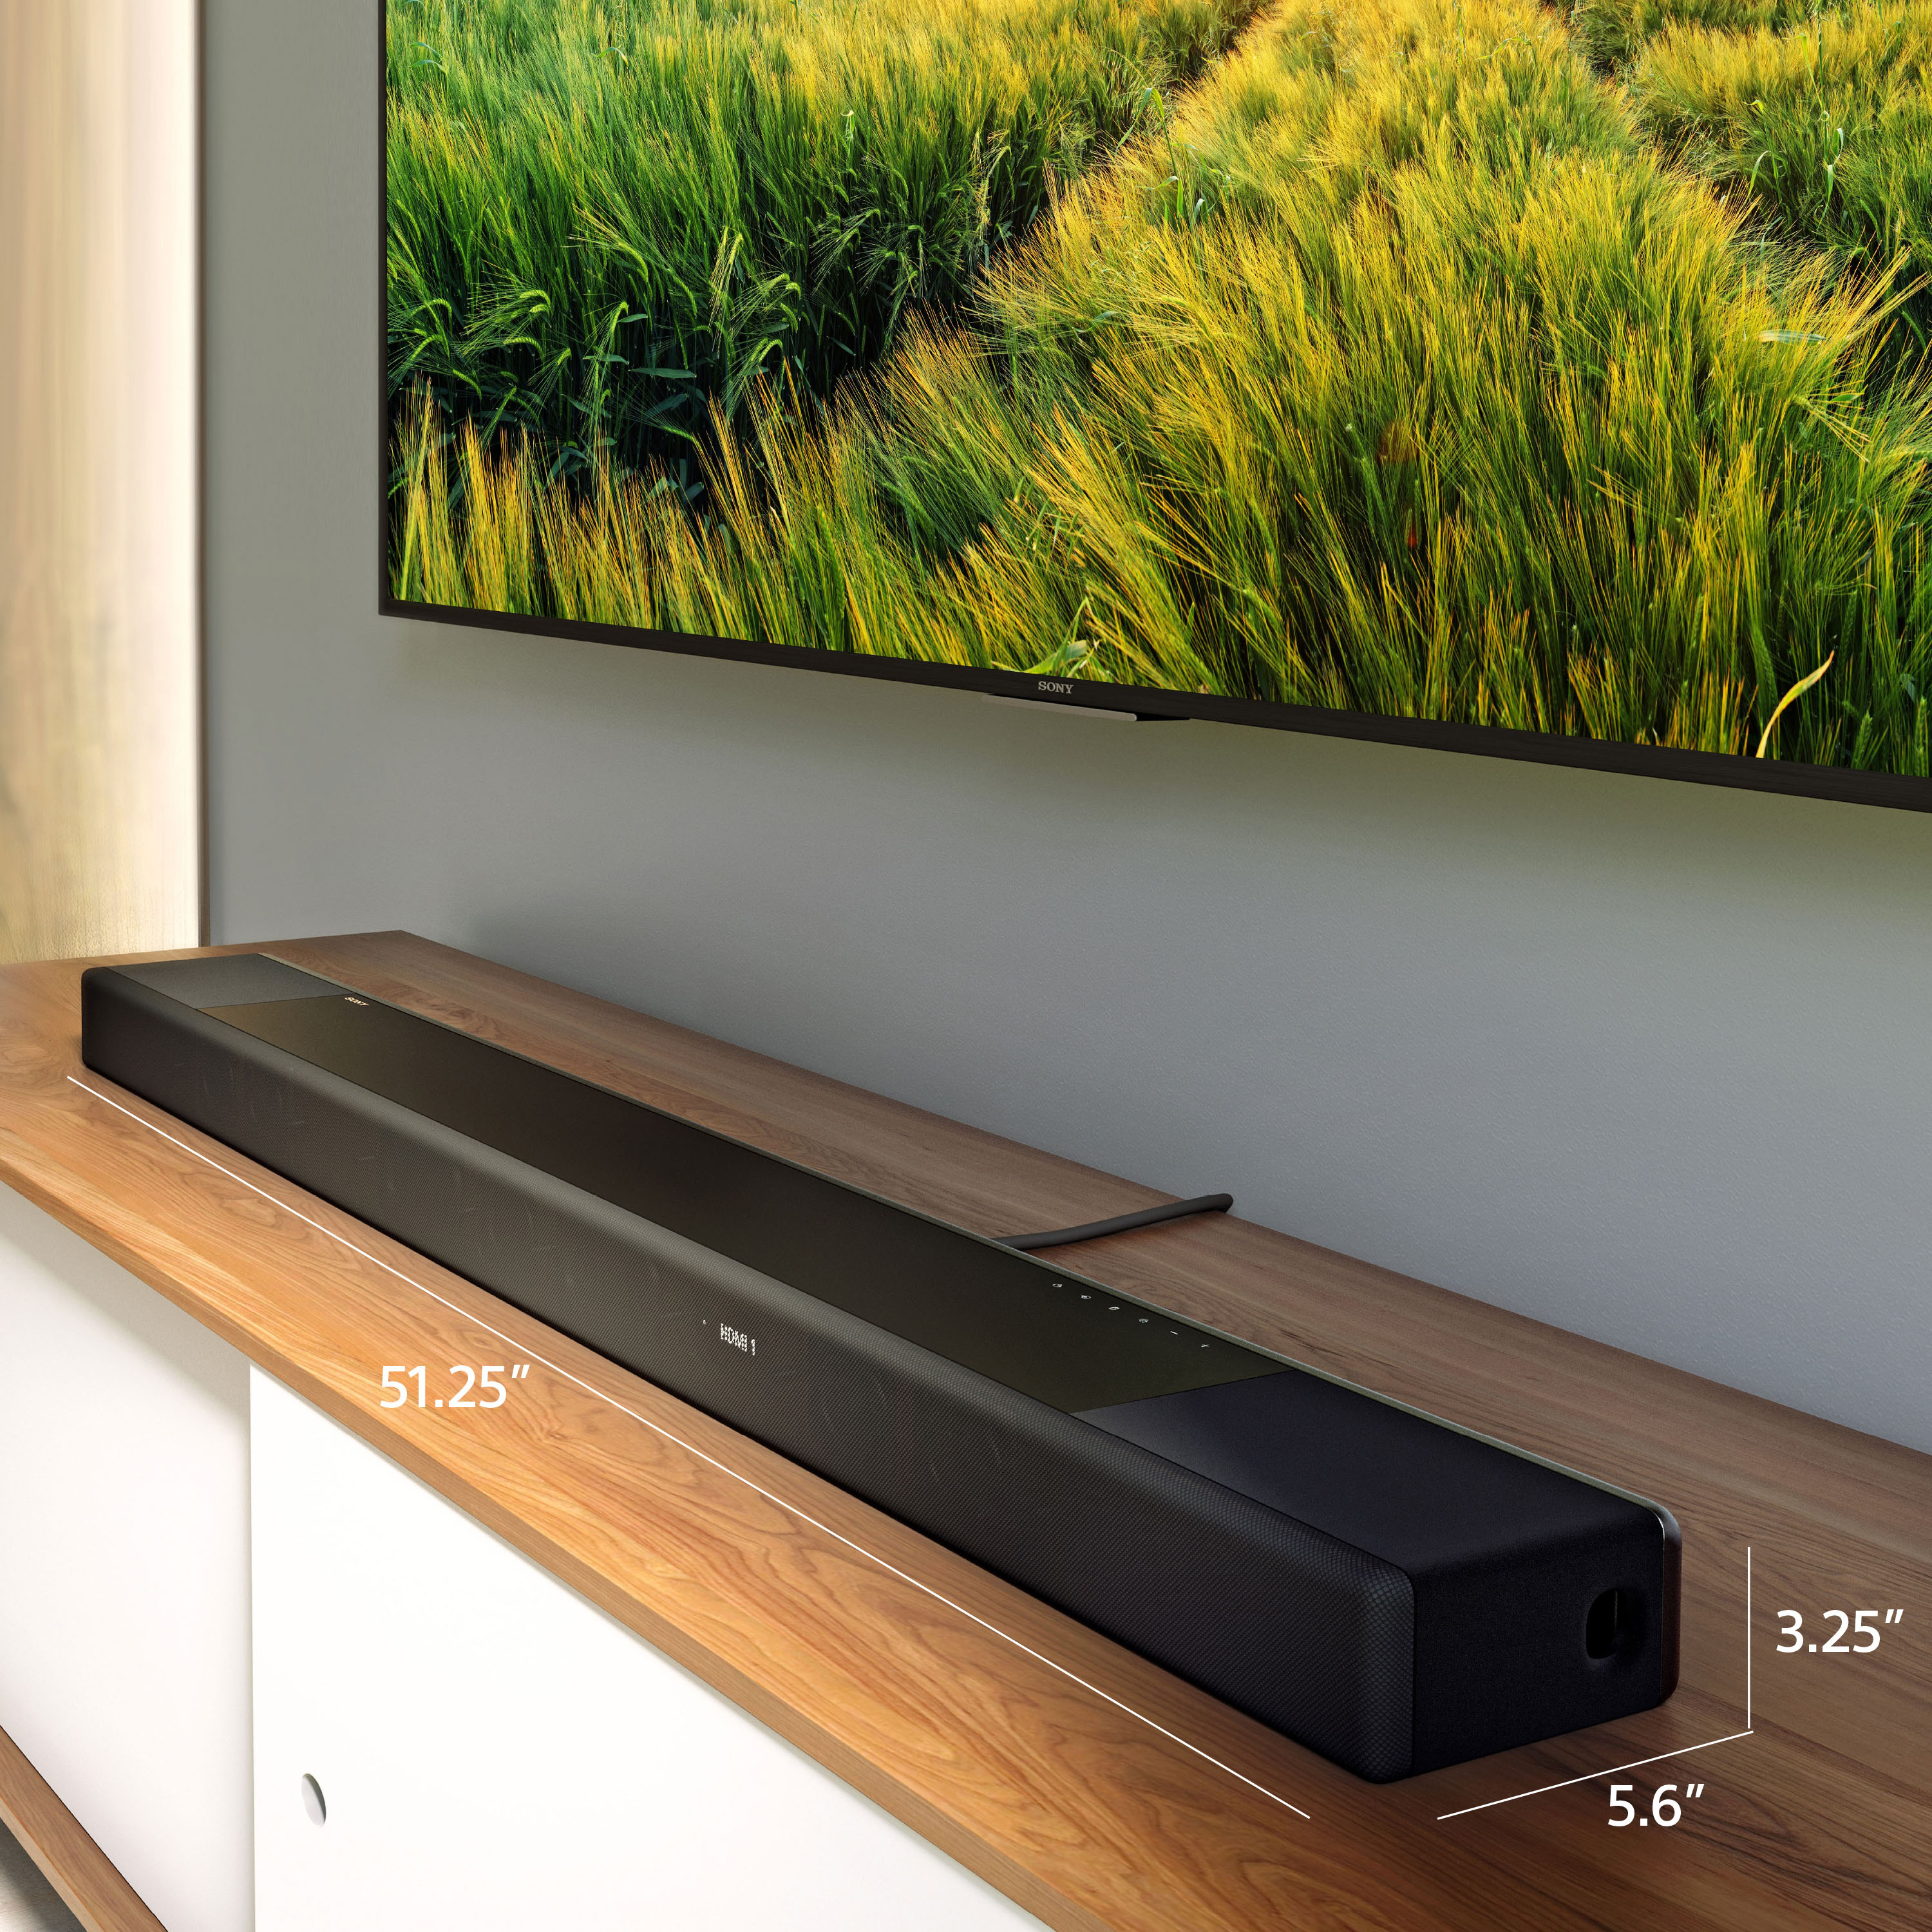 Sony HT-A7000 7.1.2ch 500W Dolby Atmos Sound Bar Surround Sound Home  Theater with DTS:X and 360 Spatial Sound Mapping, works with Alexa and  Google